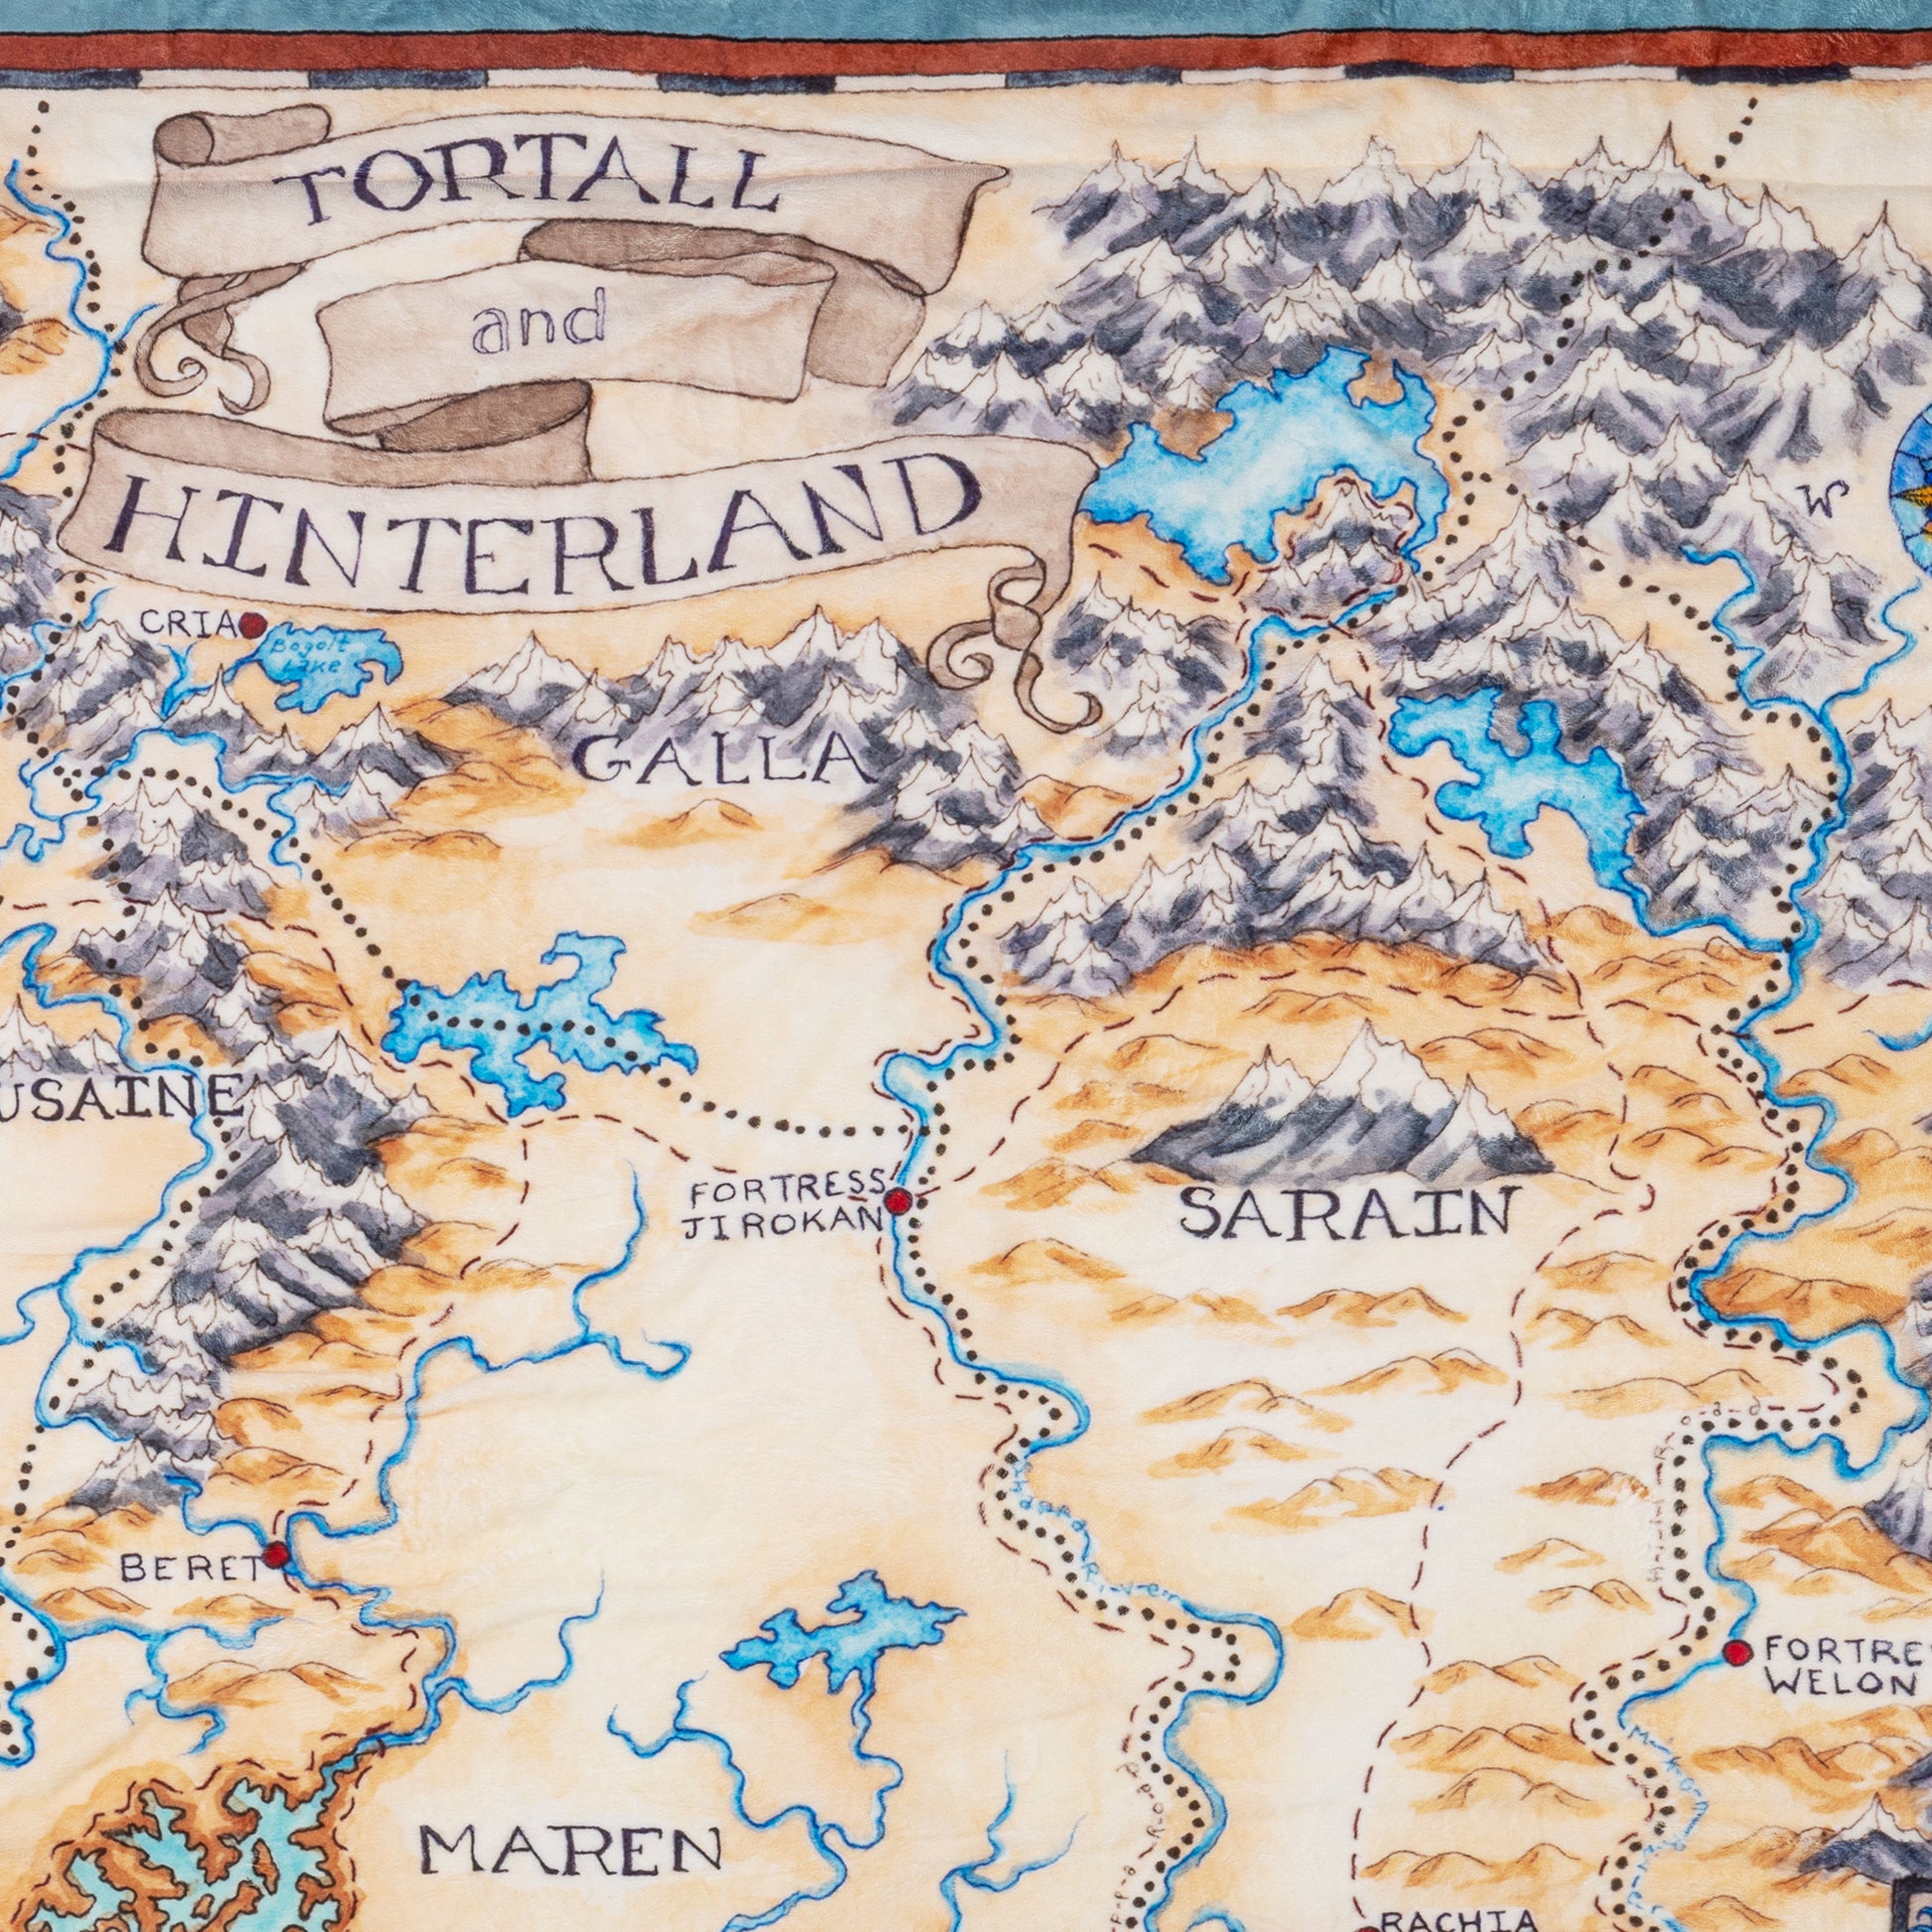 Medium shot of the illustration on the blanket, including the title "Tortall and Hinterland"